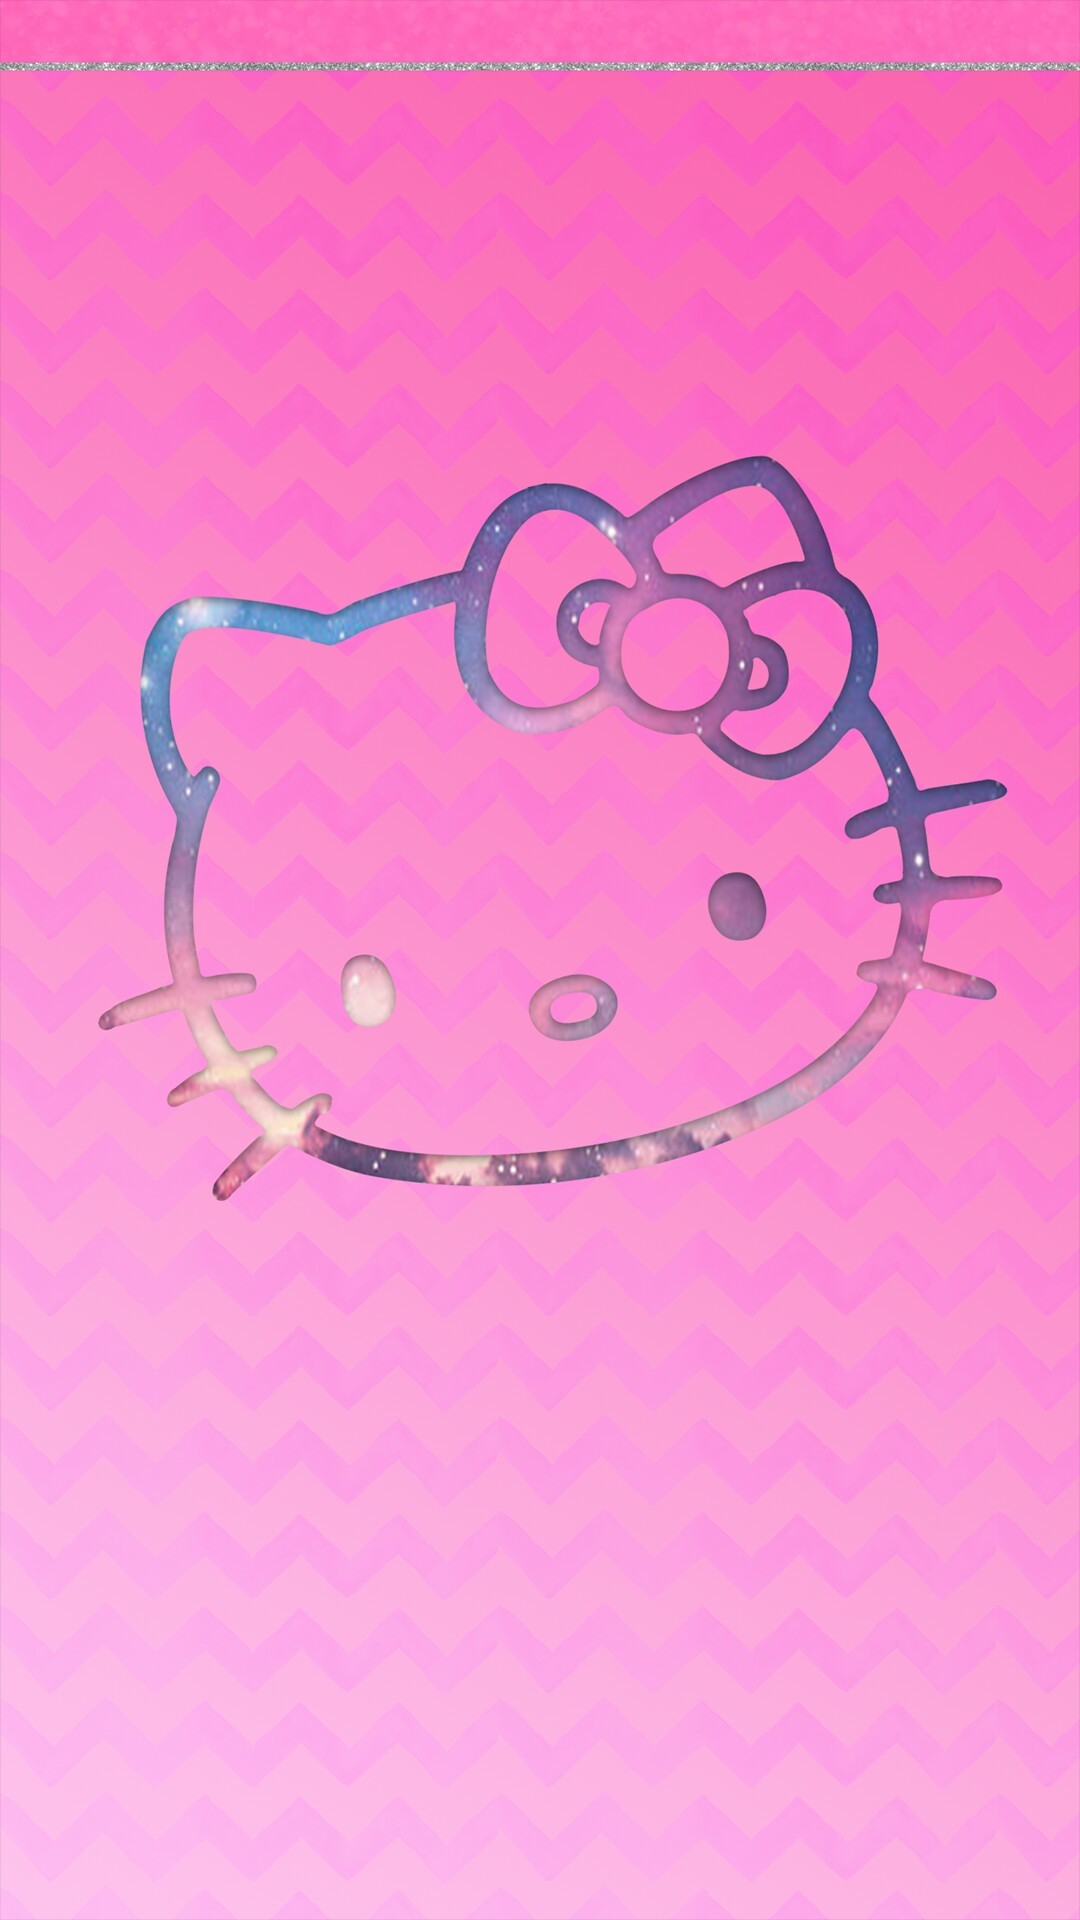 1080x1920 Hello Kitty. and like OMG! get some yourself some pawtastic adorable cat  apparel! Hello Kitty WallpaperWallpaper BackgroundsPhone ...